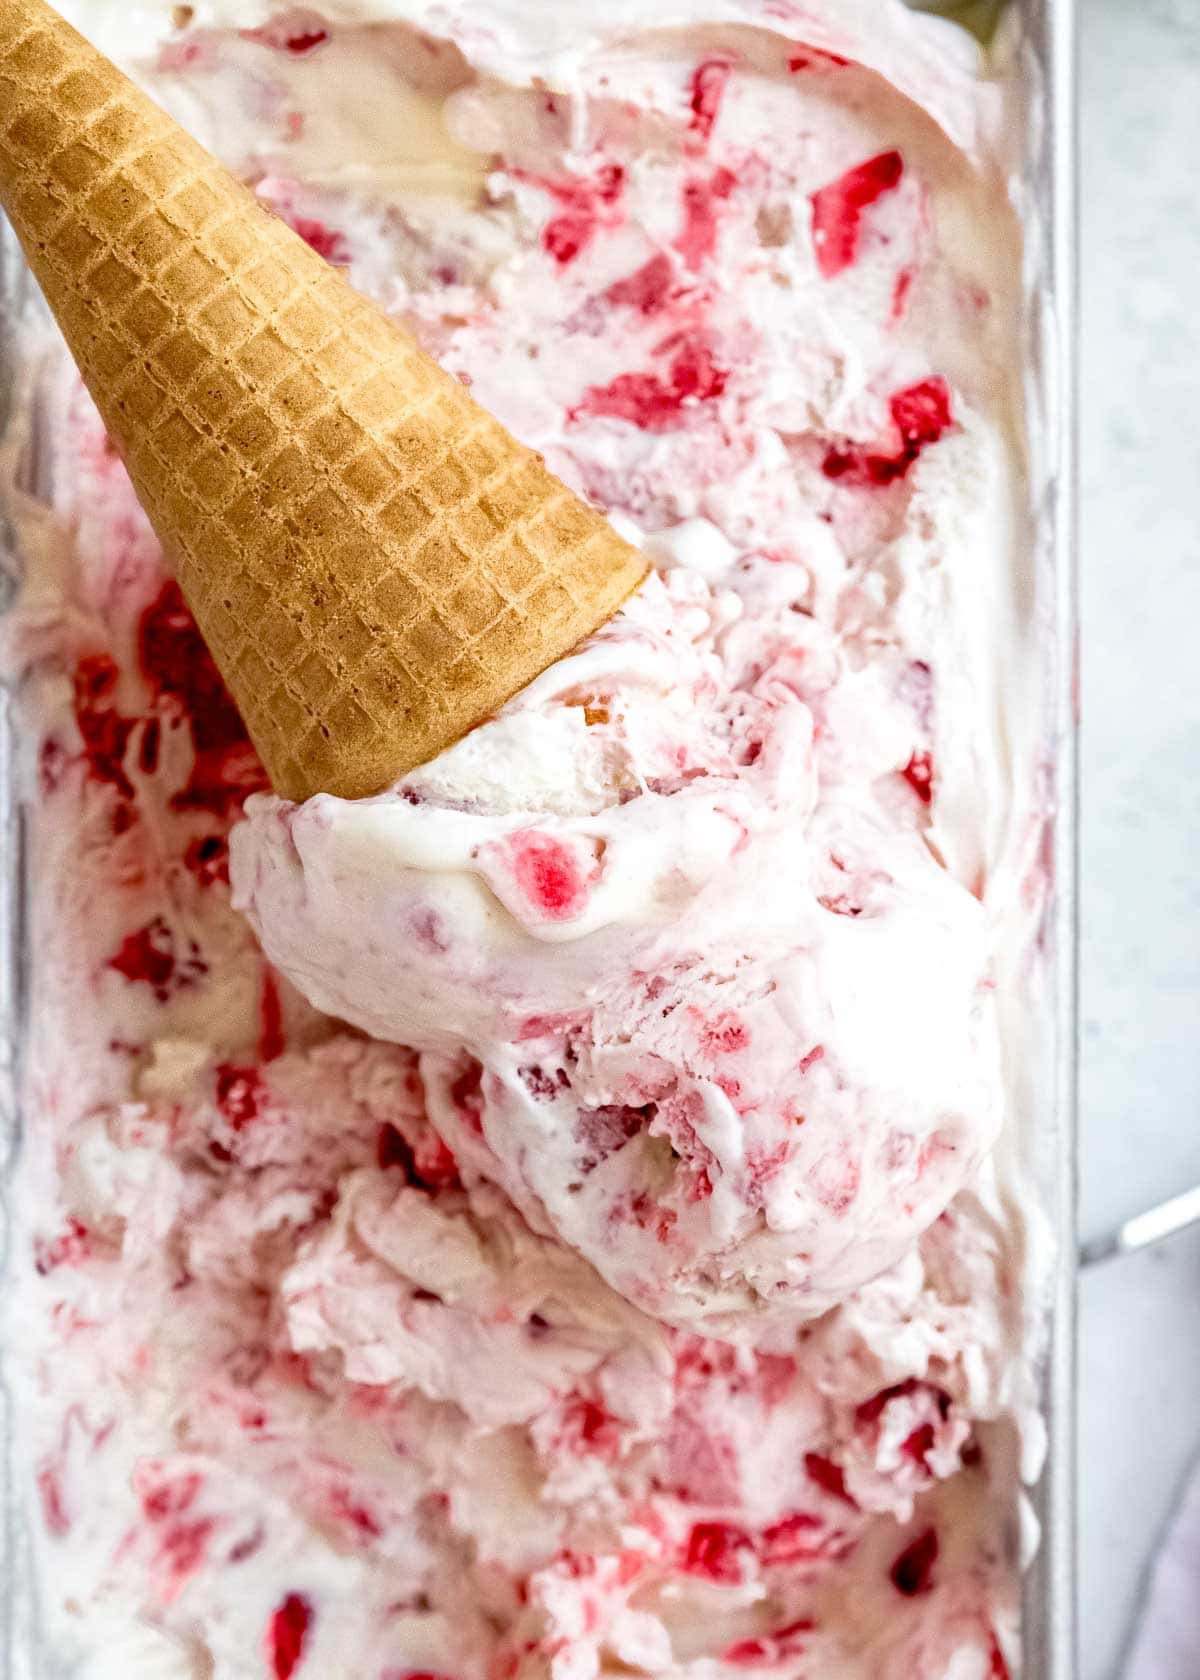 no churn strawberry ice cream scooped into a waffle cone on top of the batch of homemade ice cream